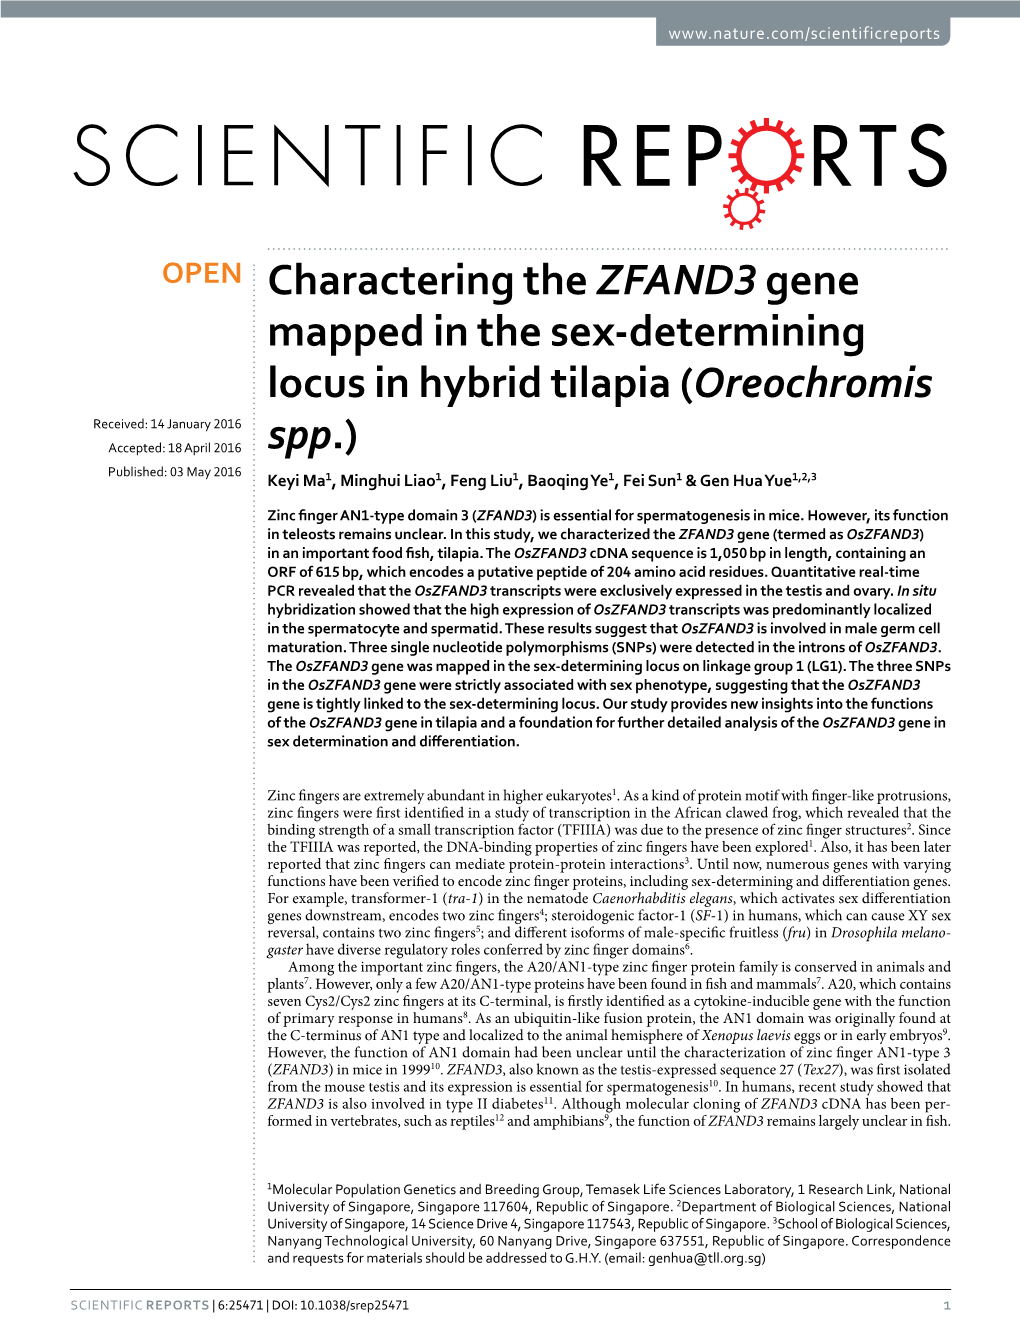 Charactering the ZFAND3 Gene Mapped in the Sex-Determining